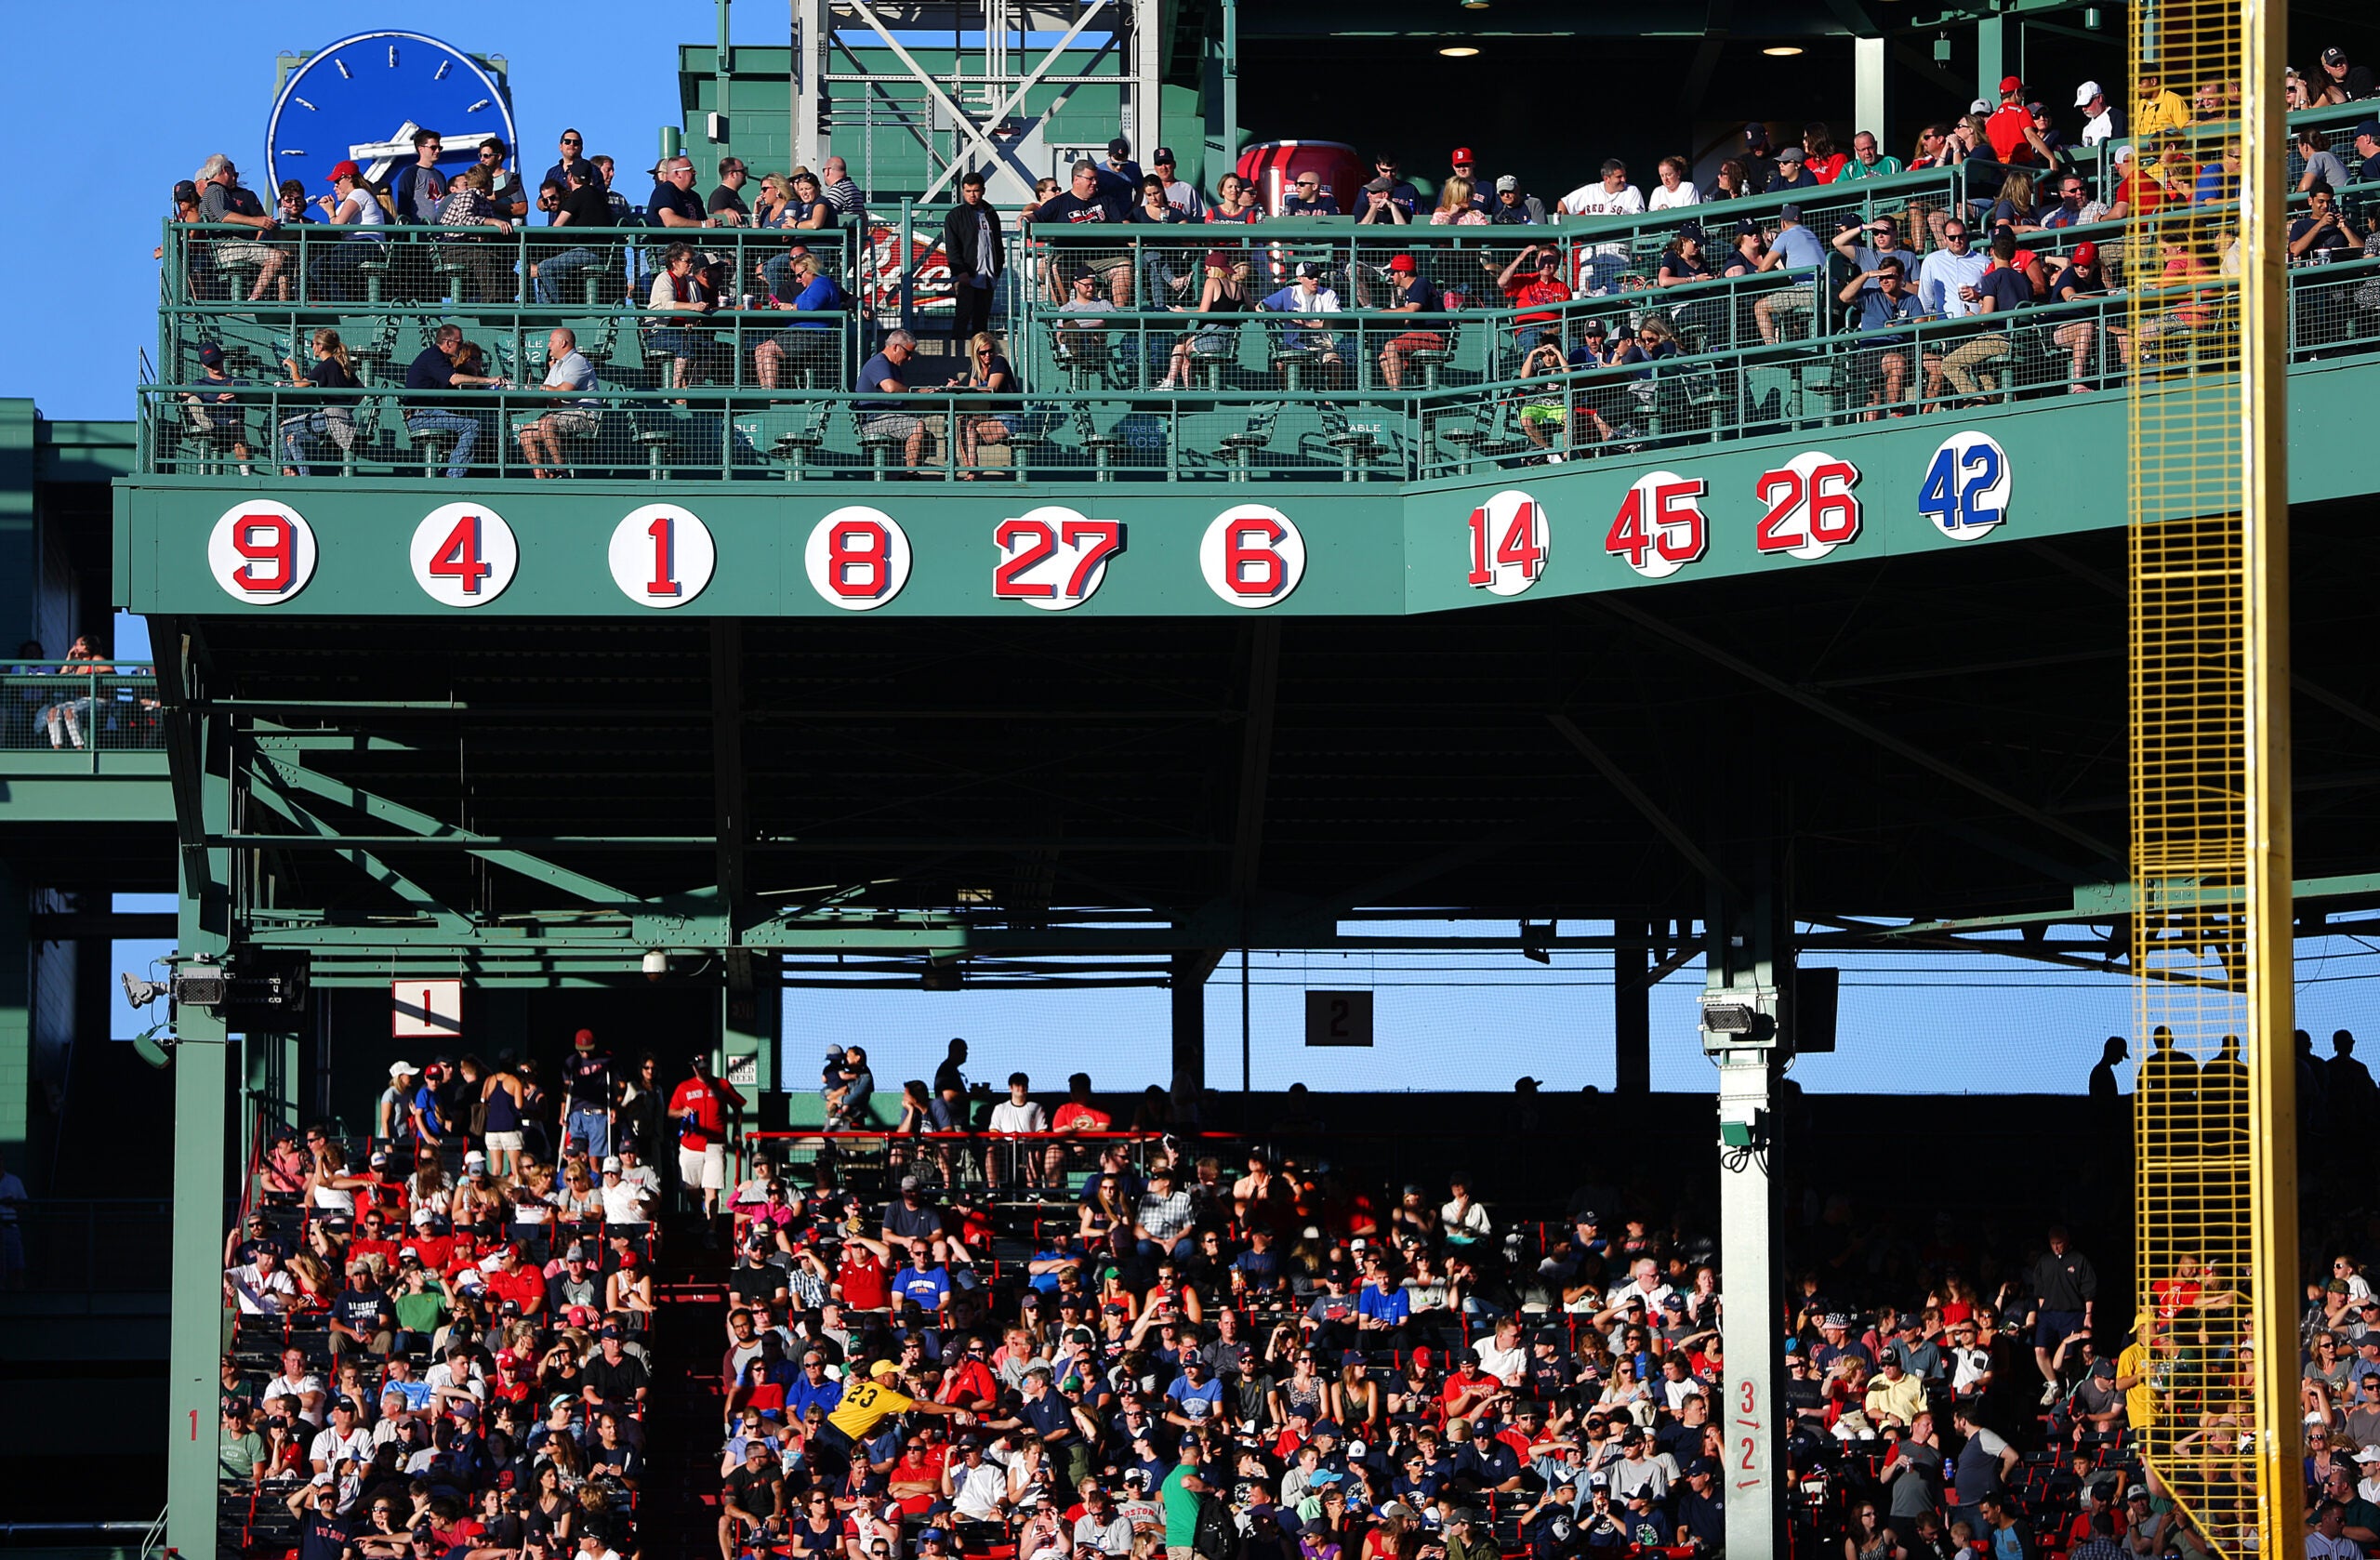 If the Boston Red Sox retired numbers like the New York Yankees do